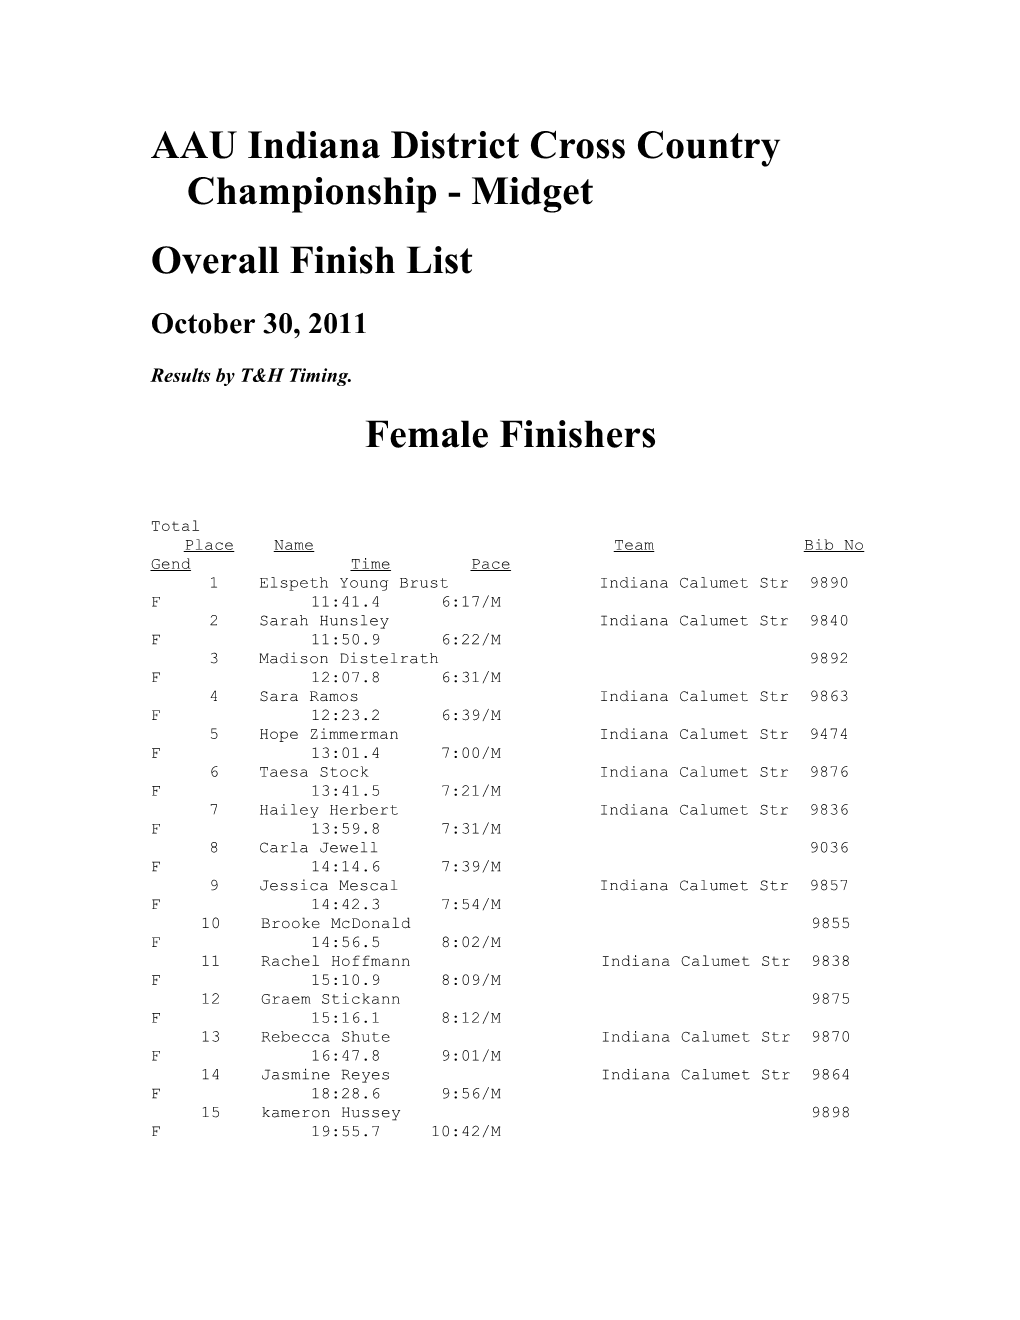 AAU Indiana District Cross Country Championship - Midget